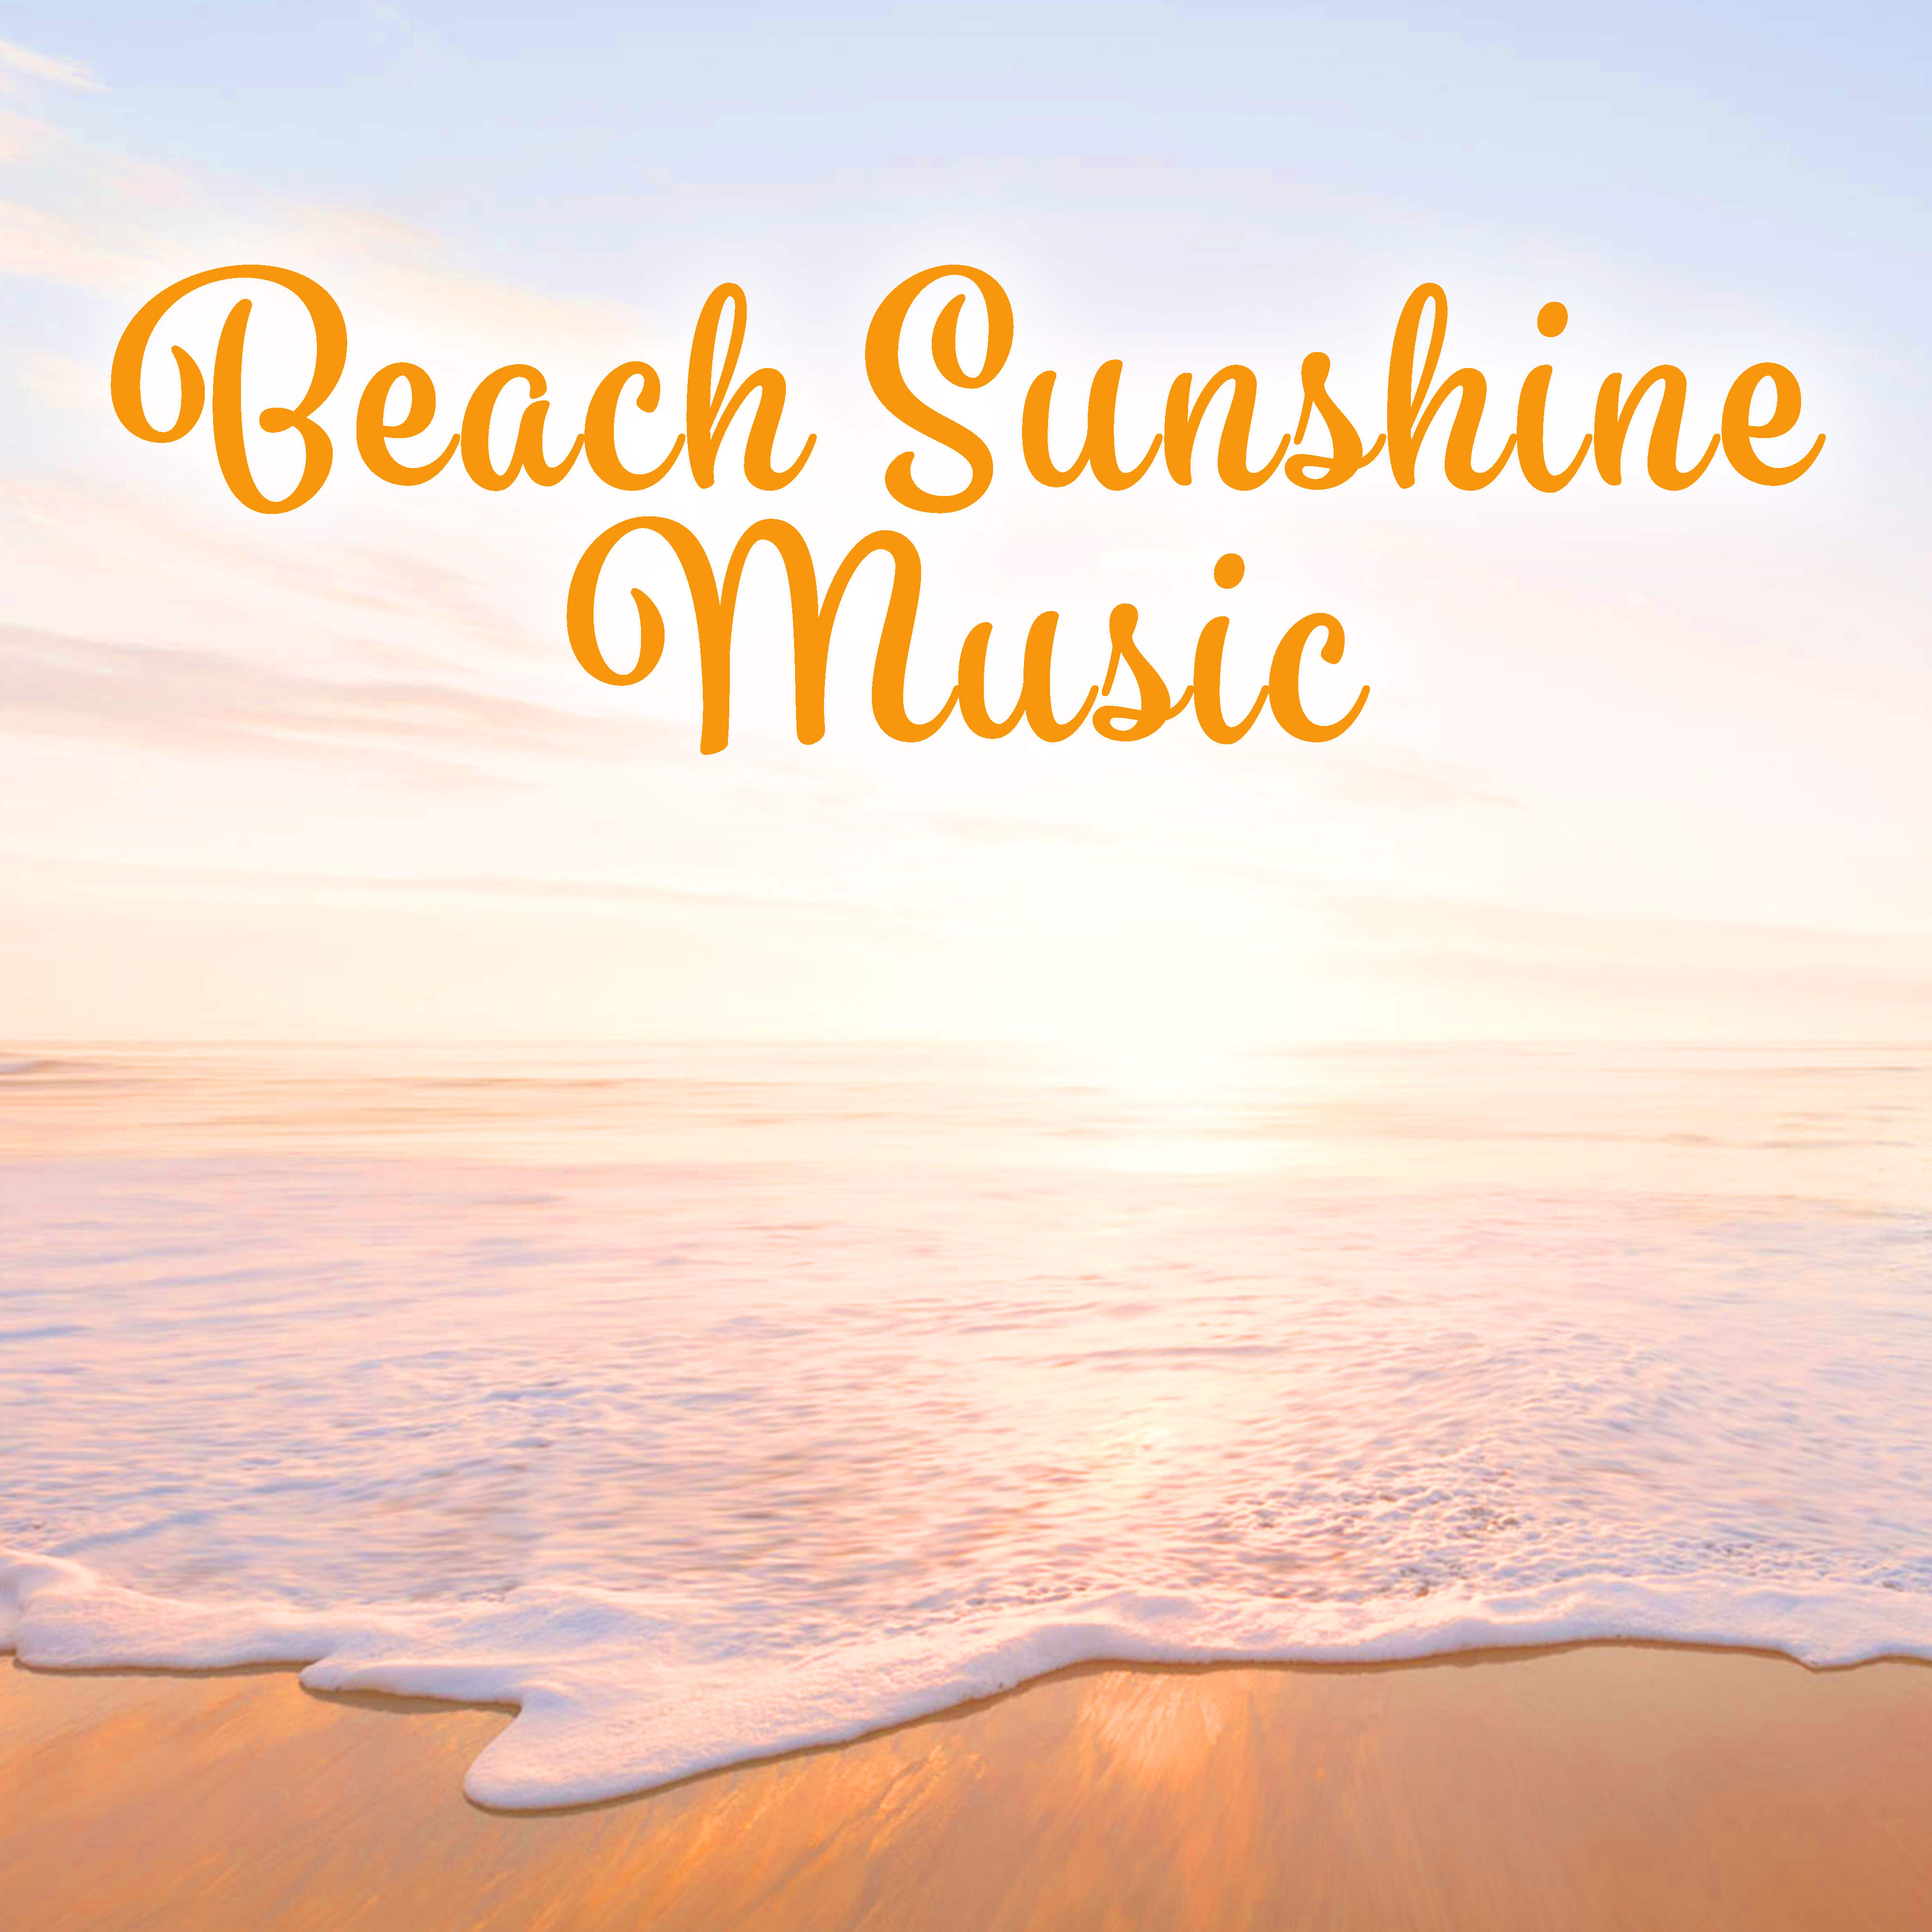 Beach Sunshine Music  Chill Out Music, Sounds to Relax, Morning Melodies to Rest, Easy Listening